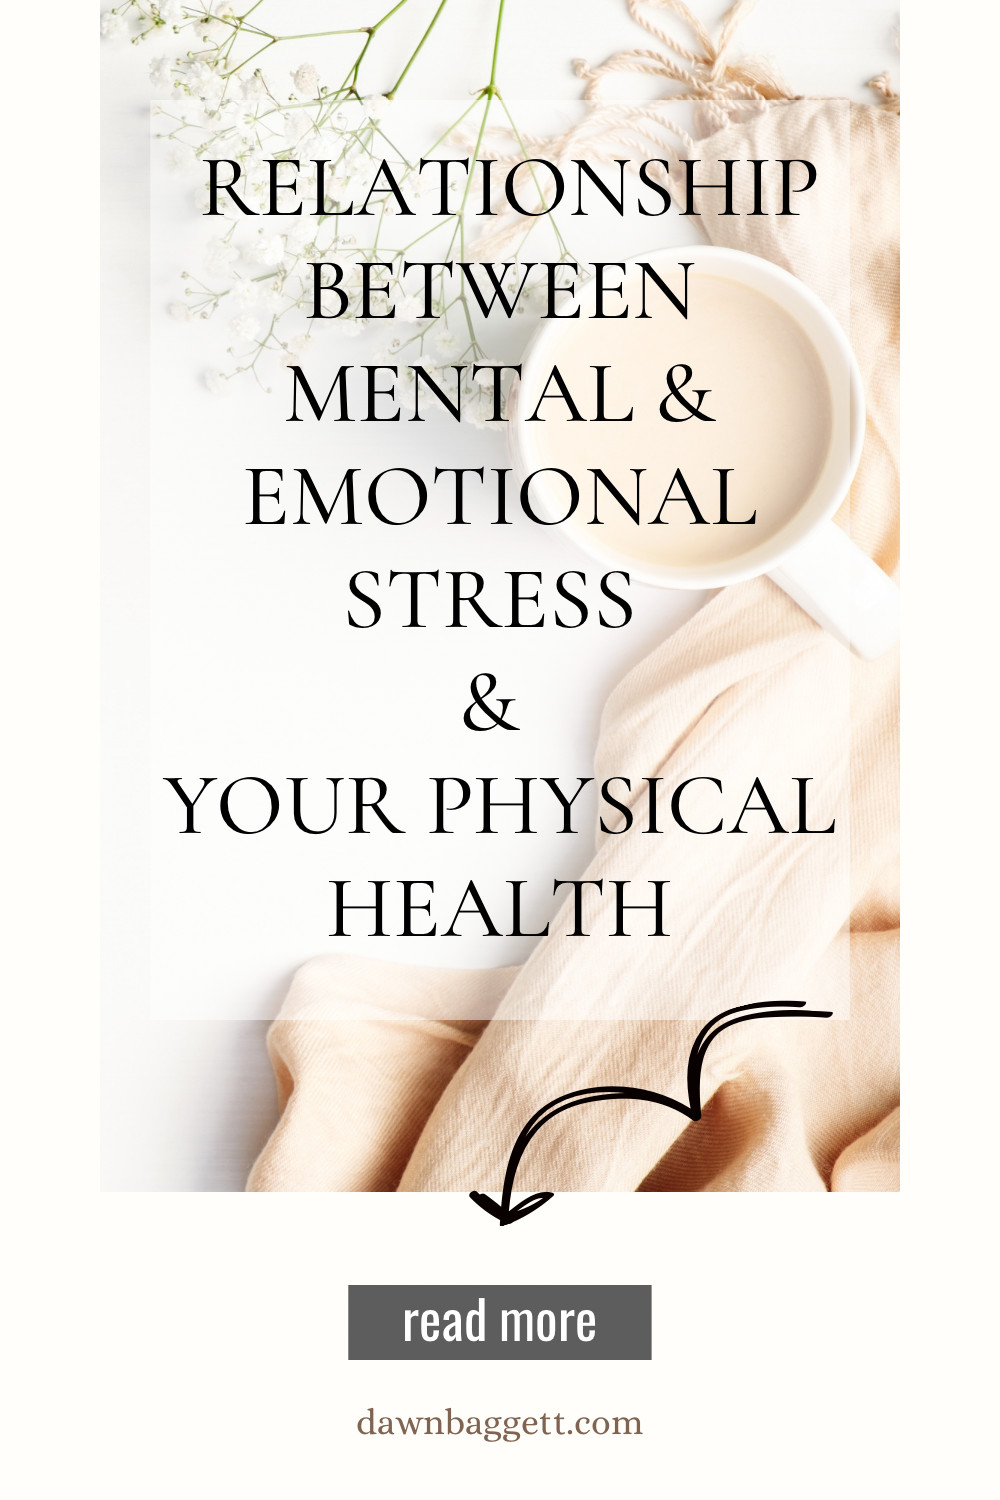 Mental & Emotional Energy Effects on Physical Health